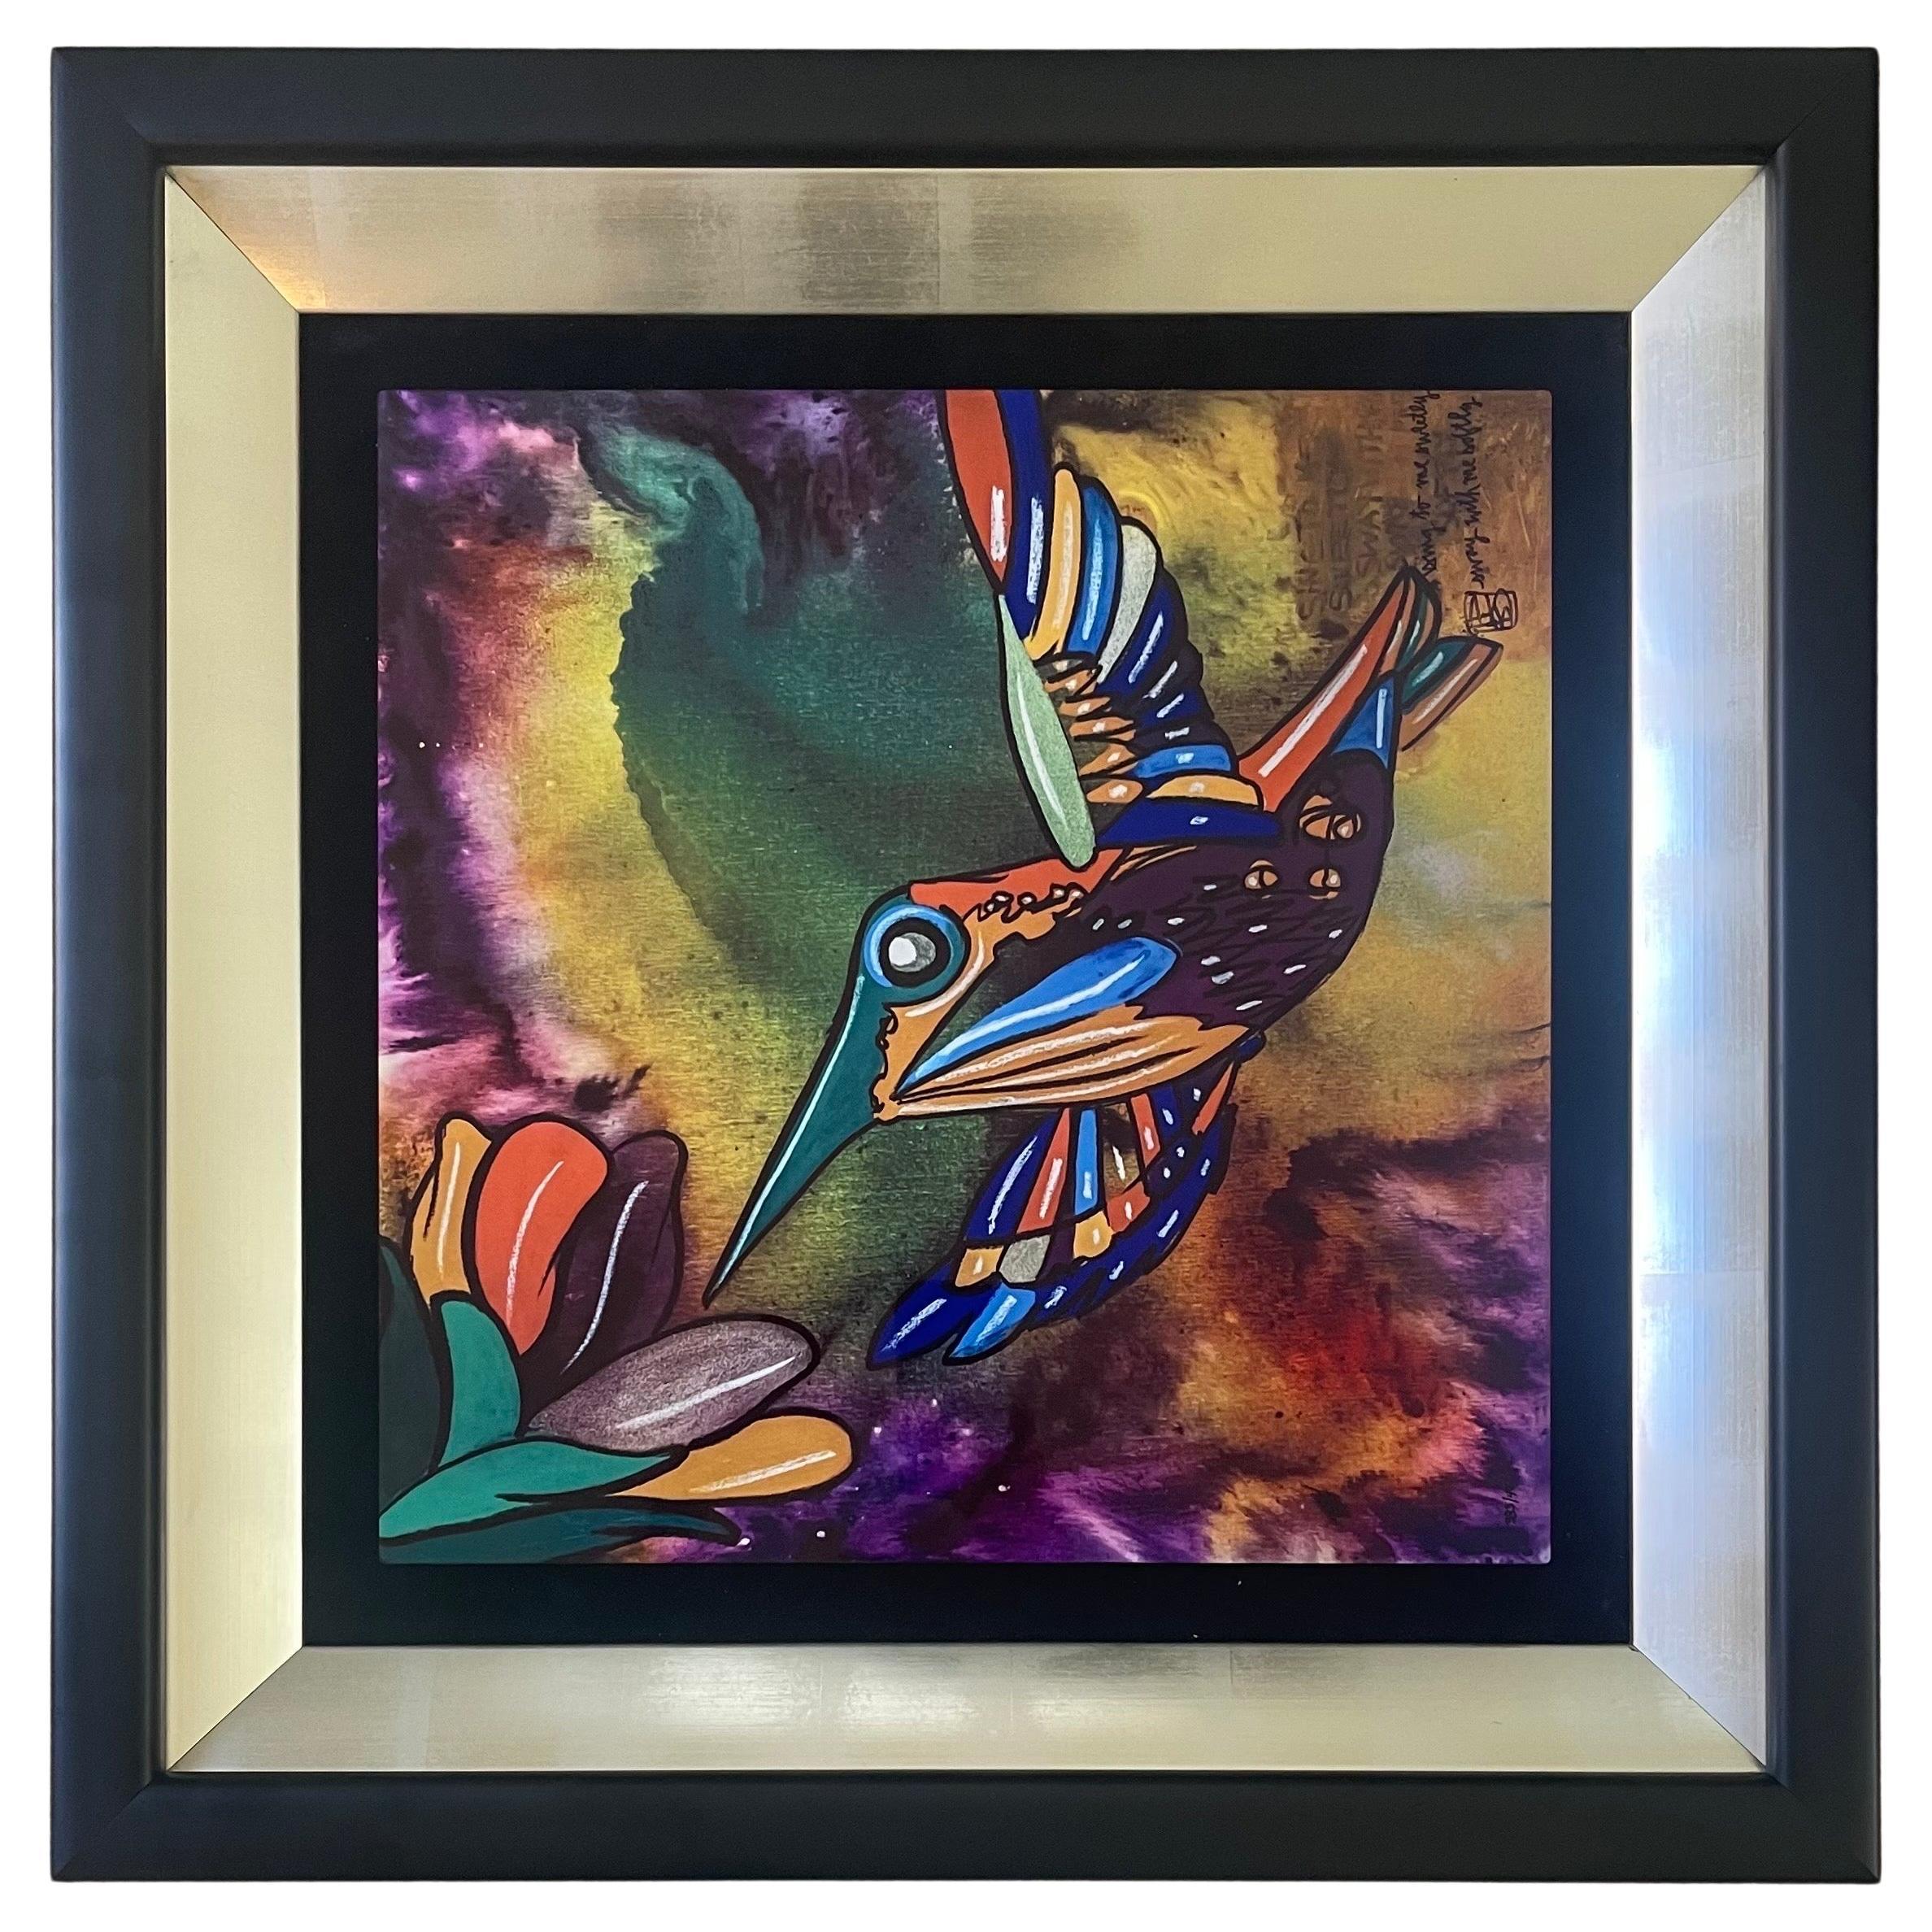 Sing to Me Sweetly" Dye Sublimation on Wood by David Le Batard, 'Lebo' For  Sale at 1stDibs